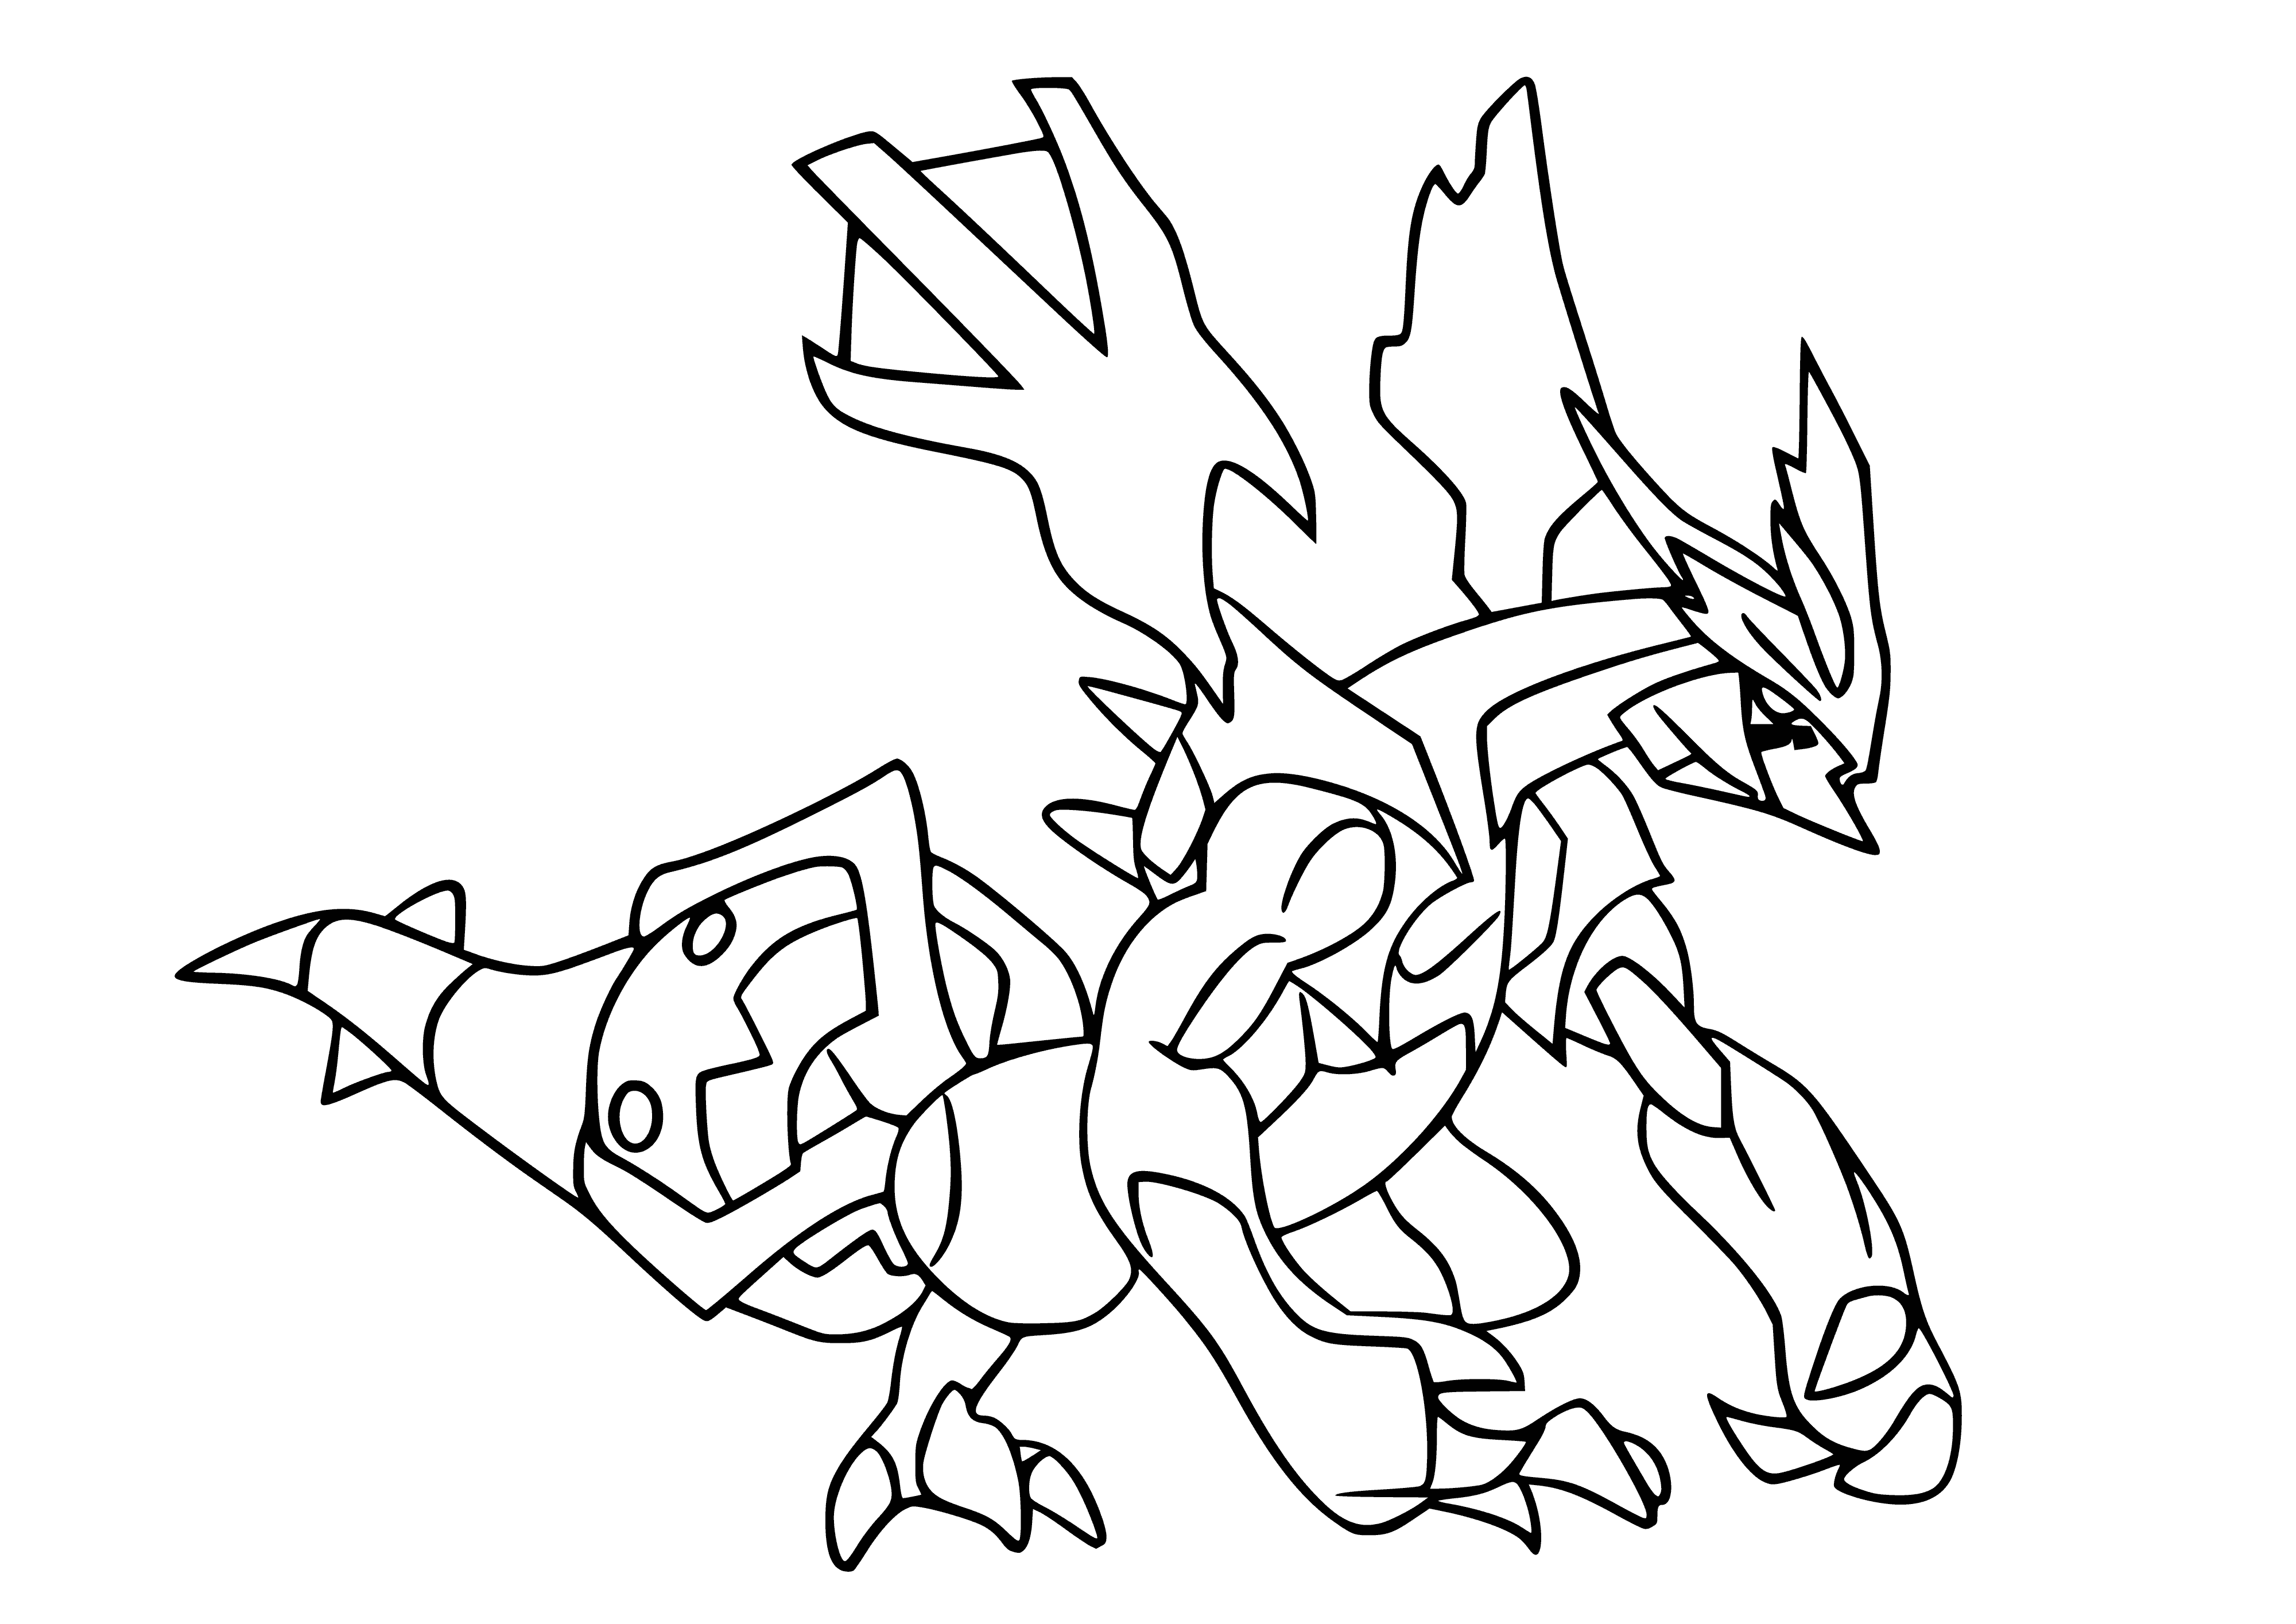 coloring page: Kyurem, a large, draconic Pokémon with red eyes & crystal spikes on its body & cheeks. It has 4 white spikes, two black claws & two long tails.